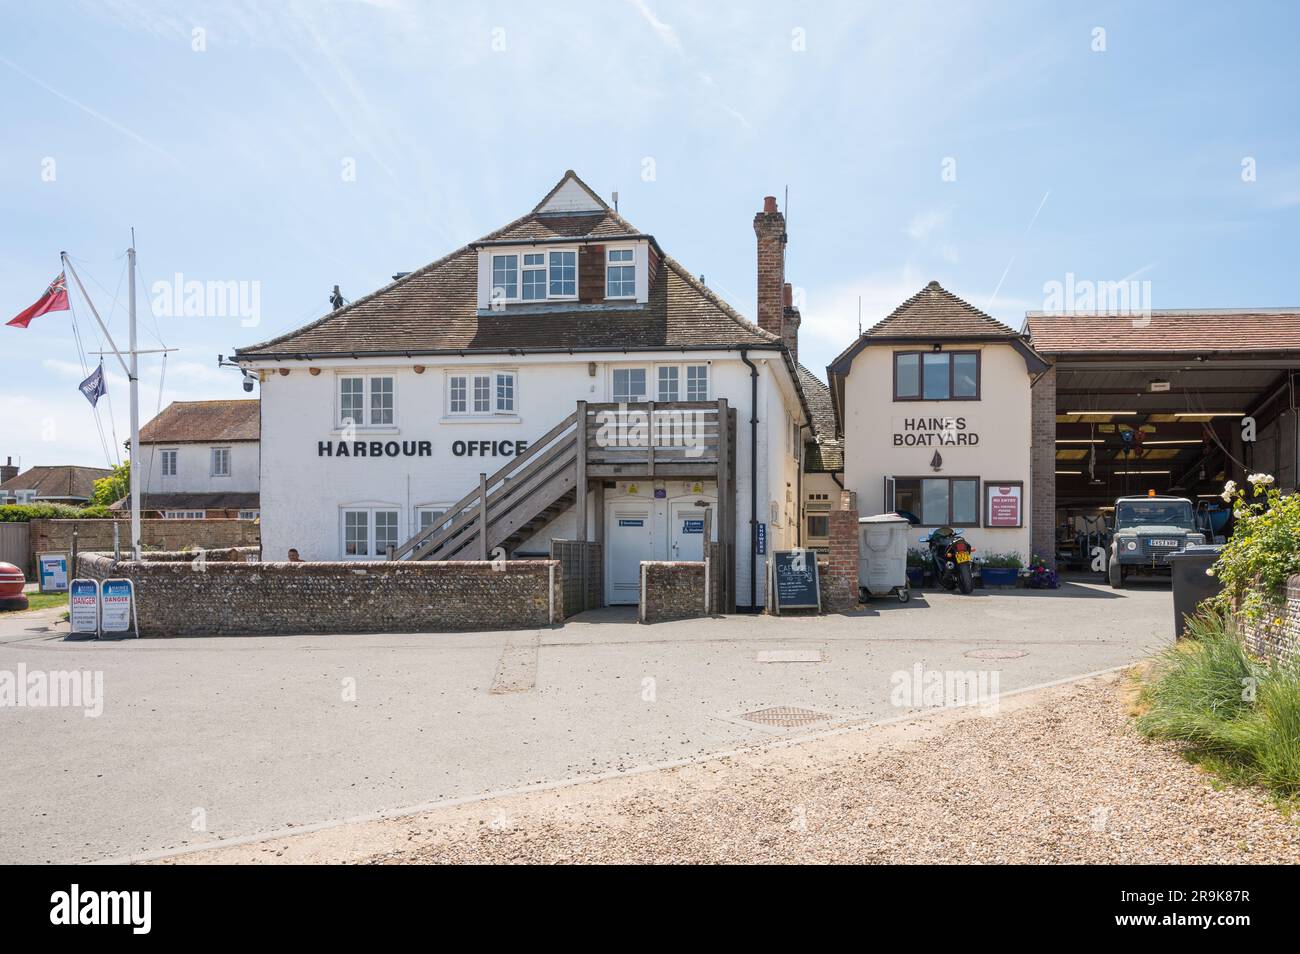 Chichester Harbour Office and Haines Boatyard at West Itchenor, Chichester, West Sussex, England, UK Stock Photo